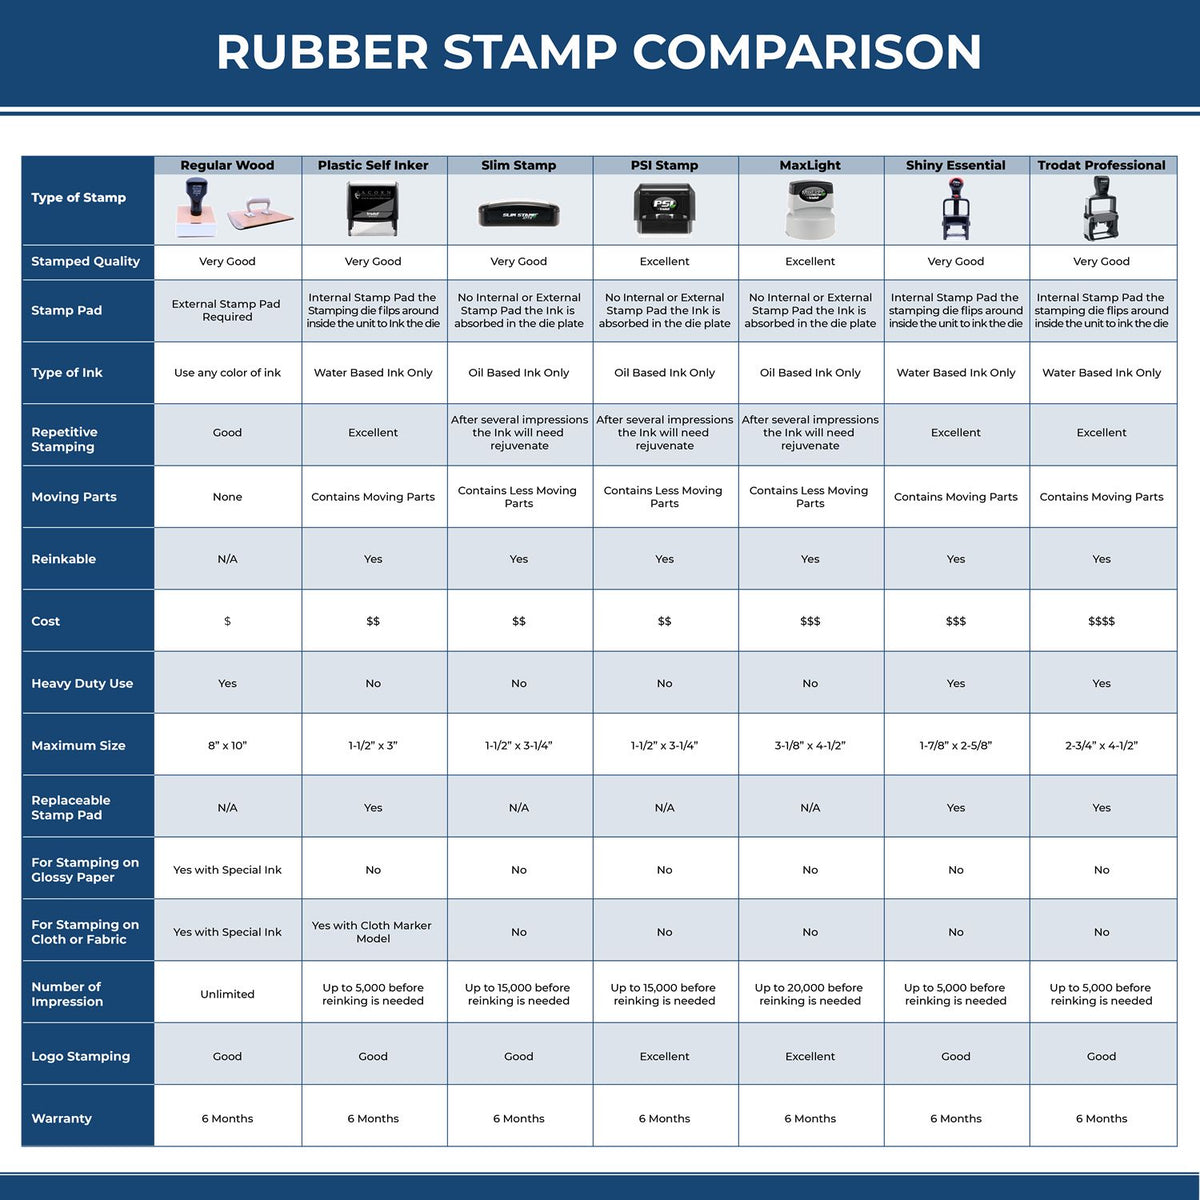 A comparison chart for the different types of mount models available for the Premium MaxLight Pre-Inked Idaho Engineering Stamp.